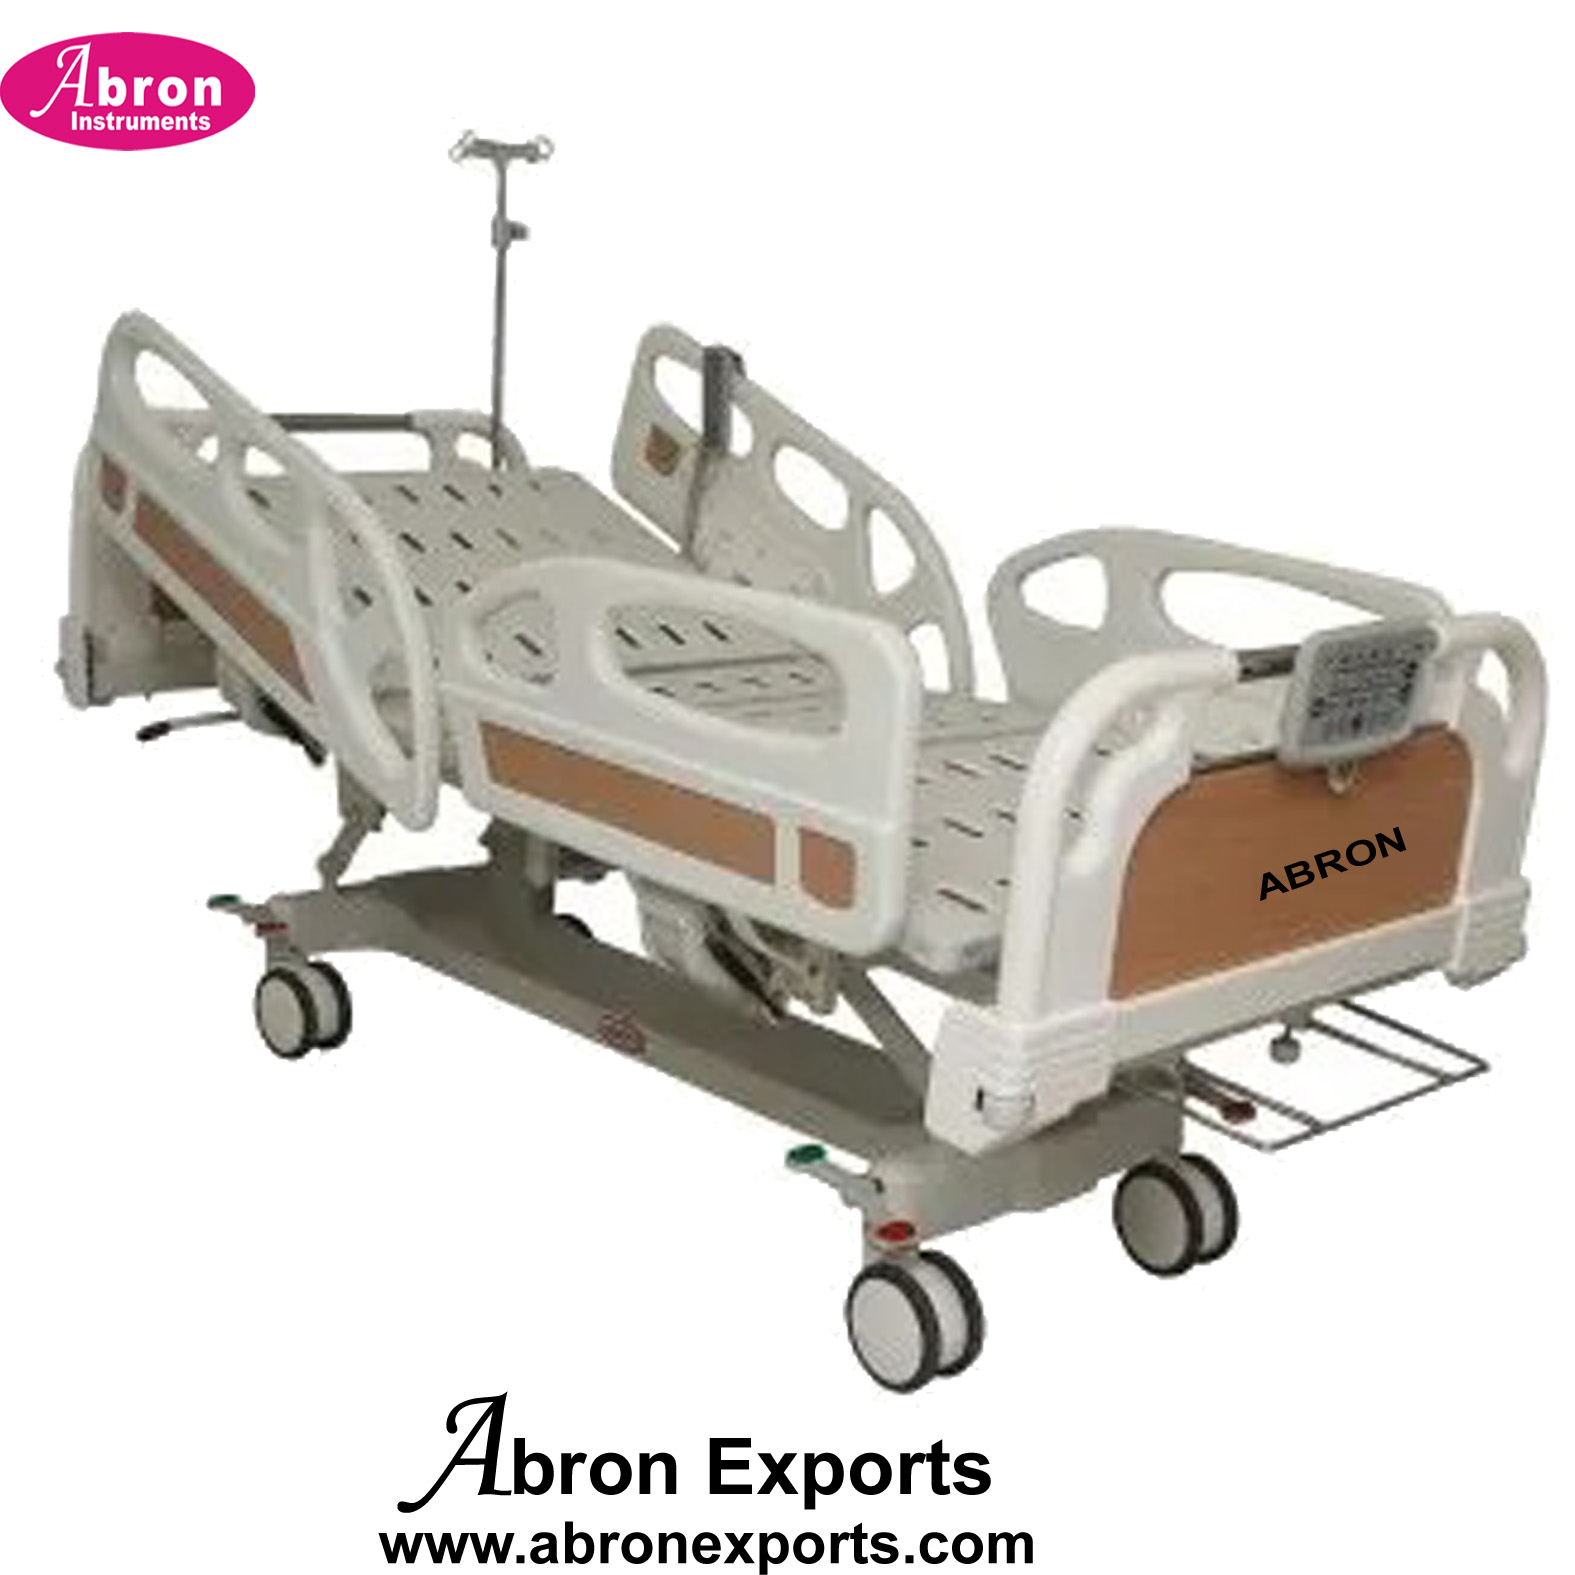 Paitent Stretcher Electric with Fowler Bed Oxygen O2 holder IV stand 2 Function 4 wheel U84 Abron ABM-2261SE2I 